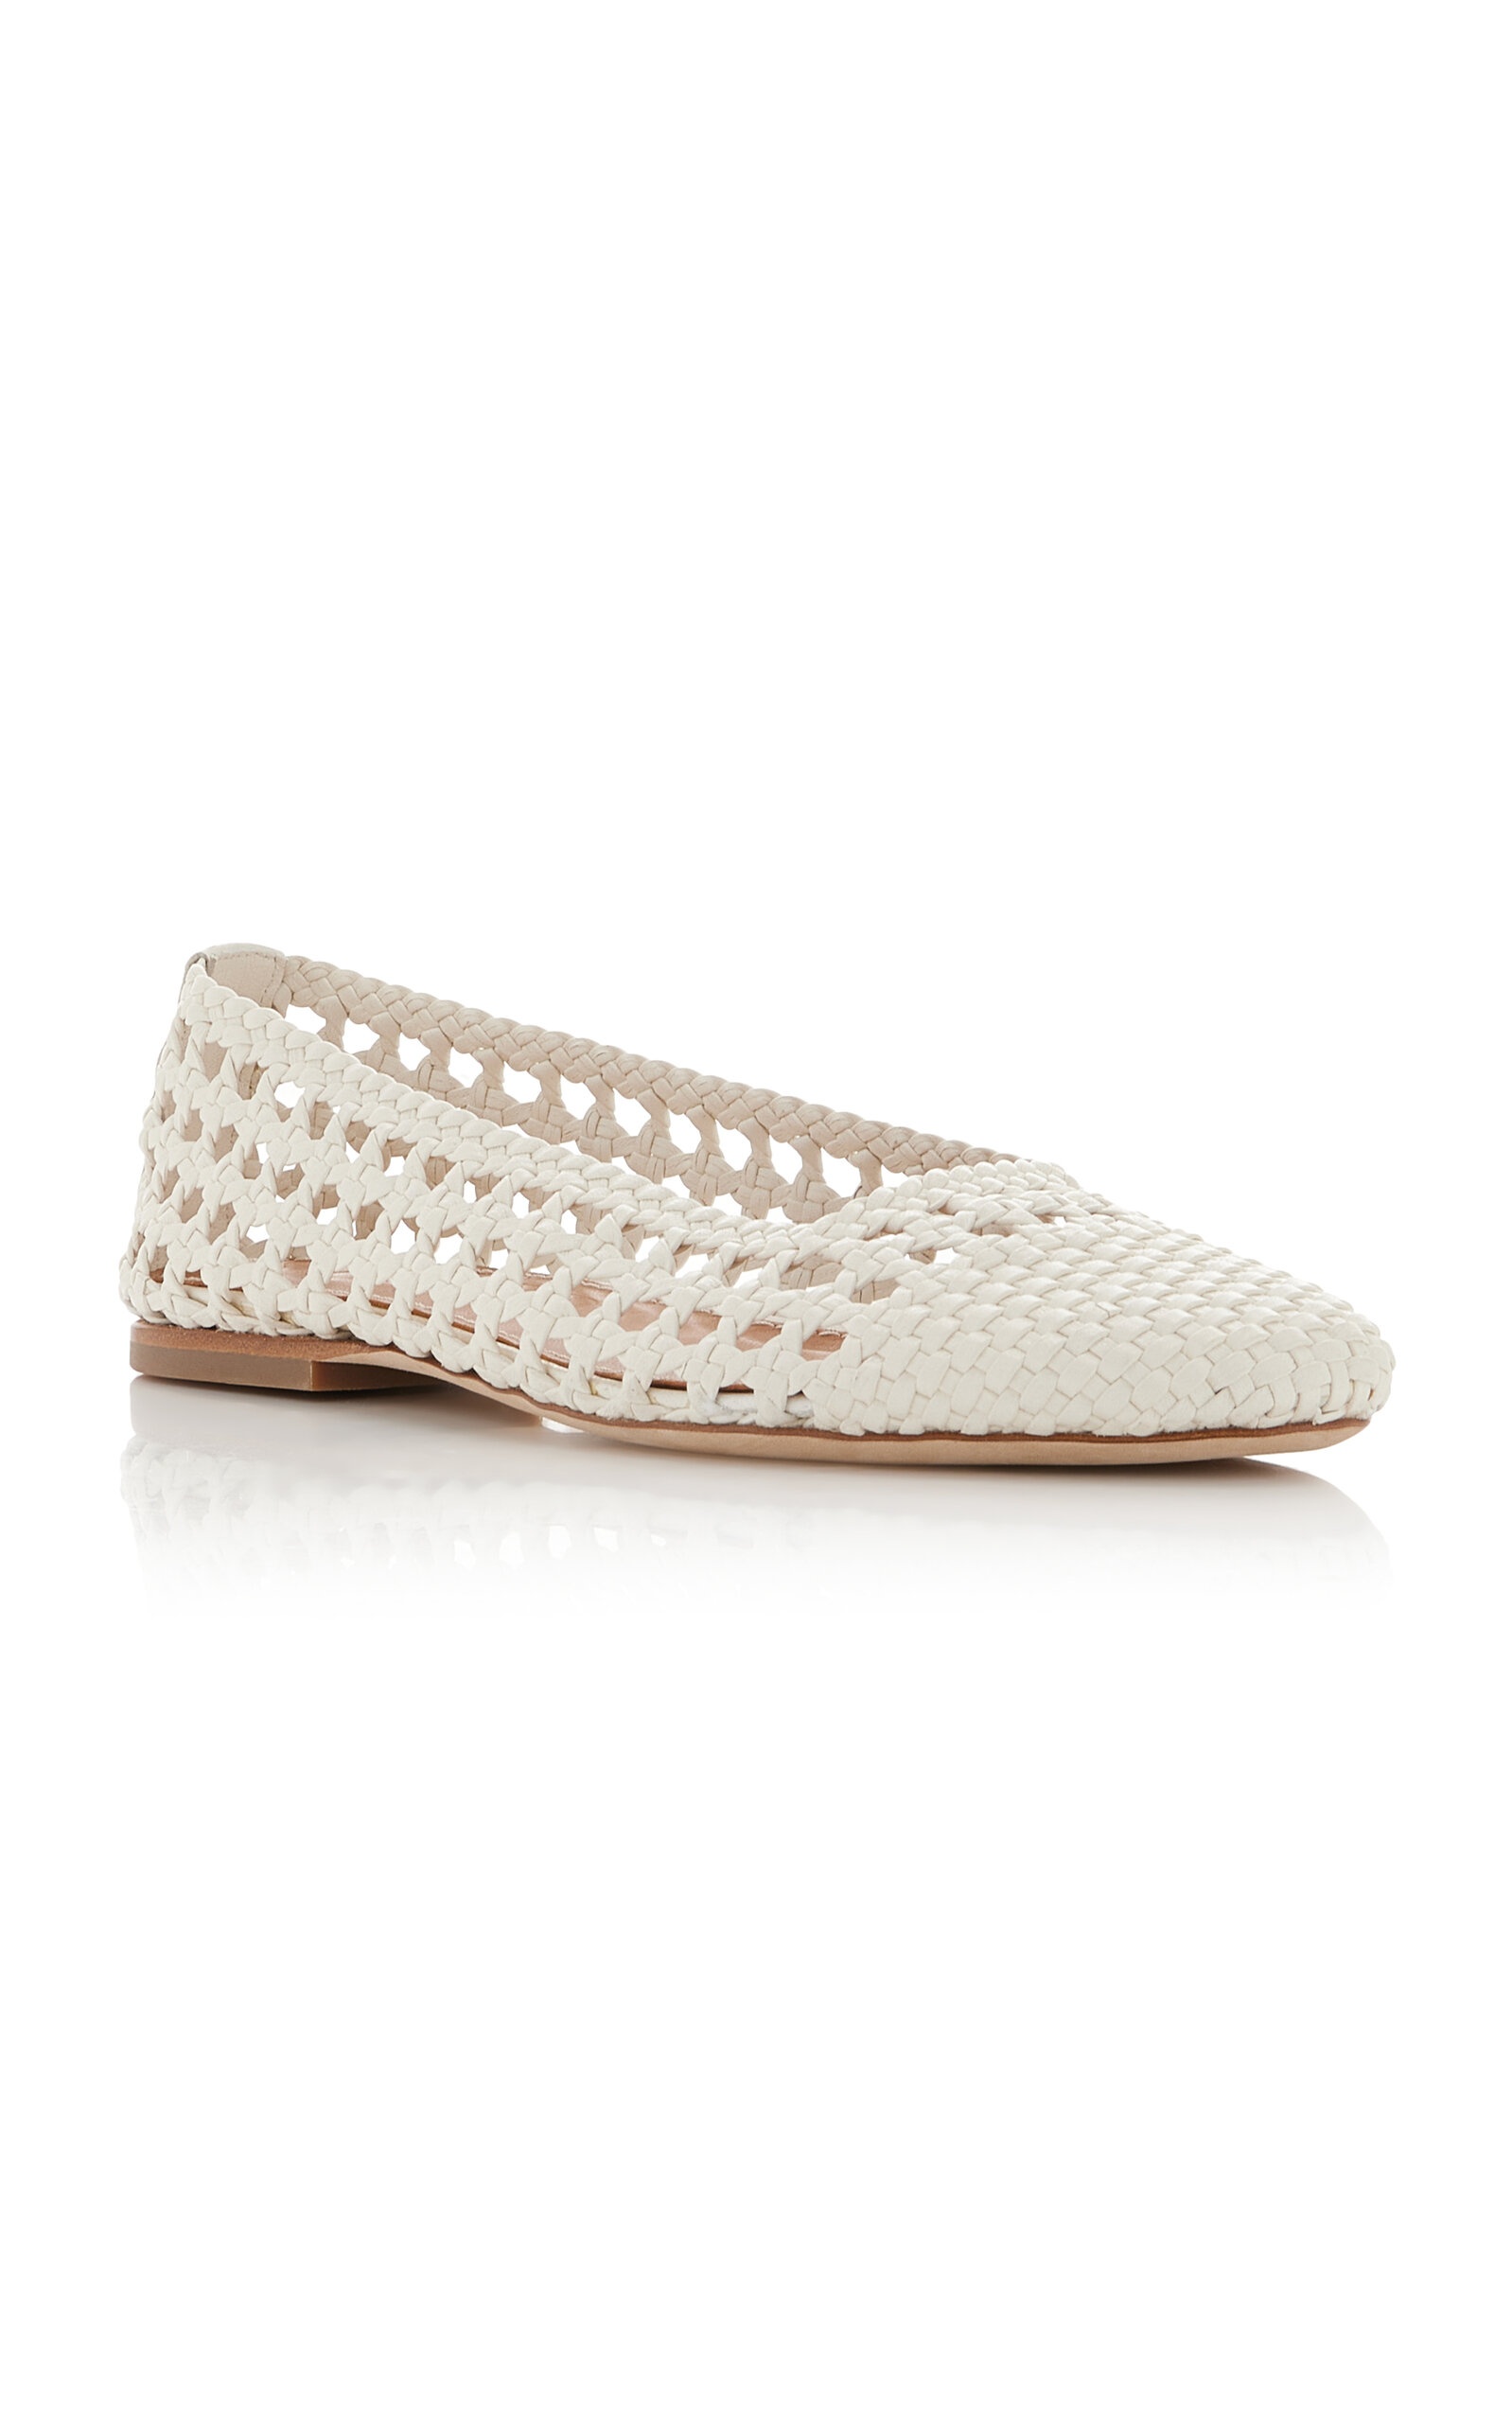 Nell Crocheted Leather Flats white - 3